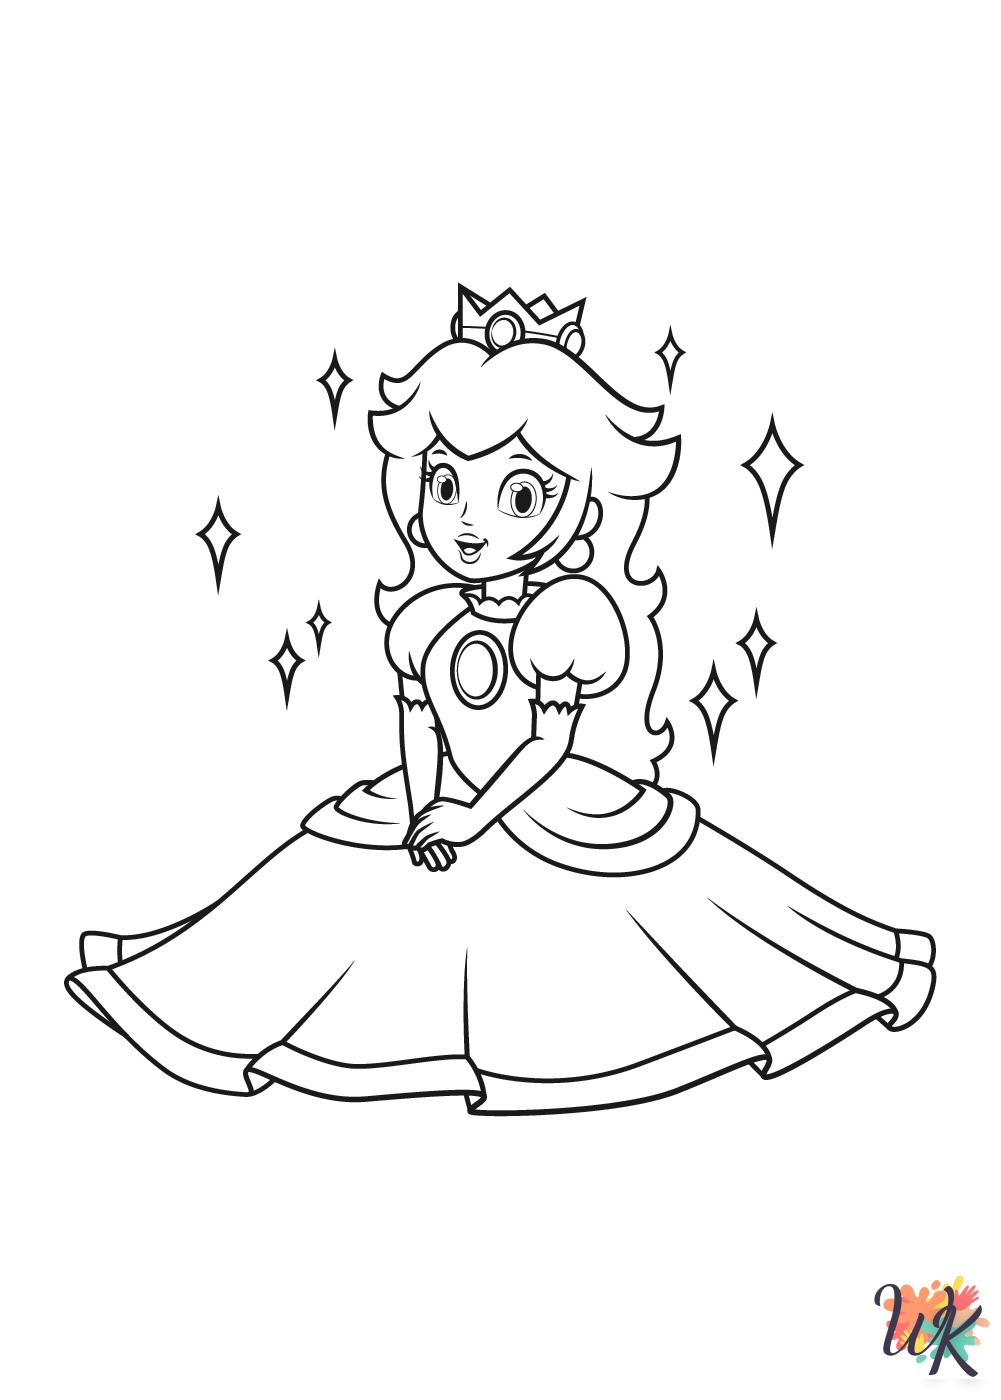 Princess Peach coloring pages for preschoolers